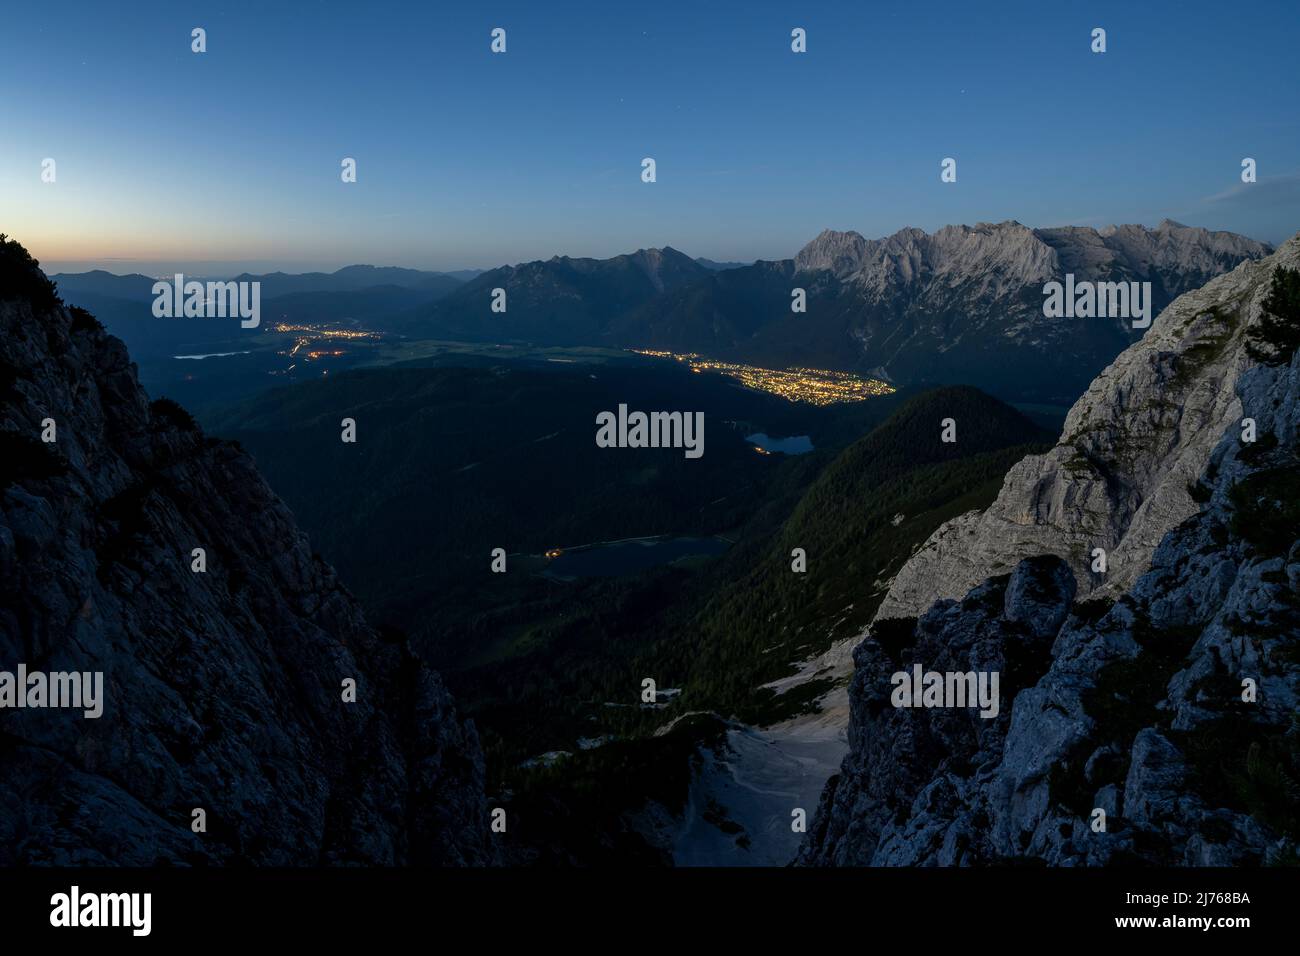 Evening mood with view over the ferchensee, Lautersee, to Mittenwald, Wallgau and Krün, as well as to the Karwendel, during the descent from the Wetterstein summit over the so-called Gamsanger. Stock Photo